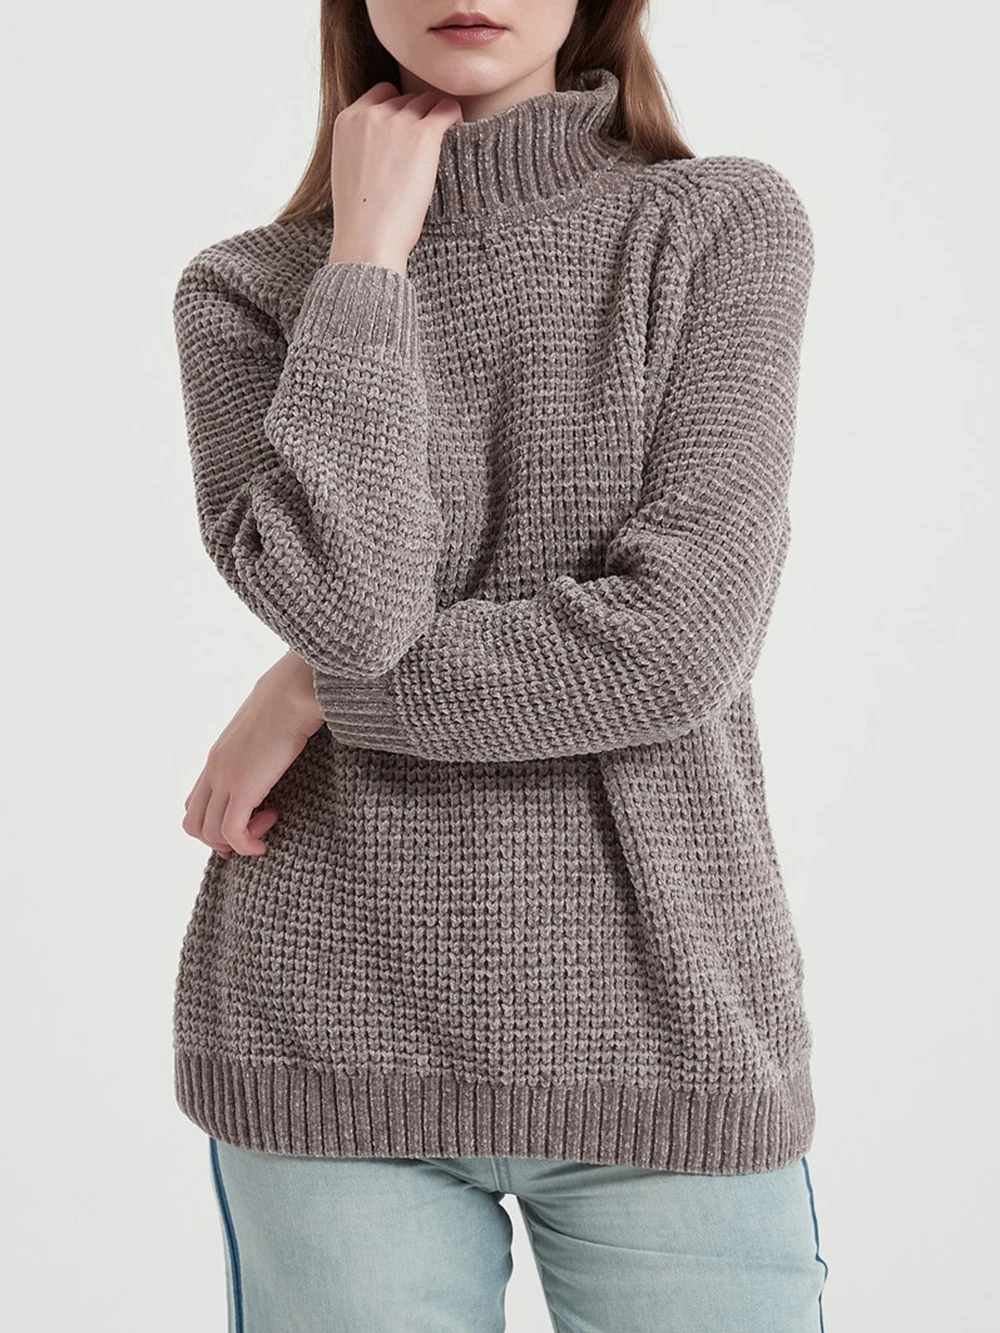 

Wixra Chenille Sweater Women Solid Pullover Long Sleeve Casual Turtleneck Jumpers Clothing Autumn Winter